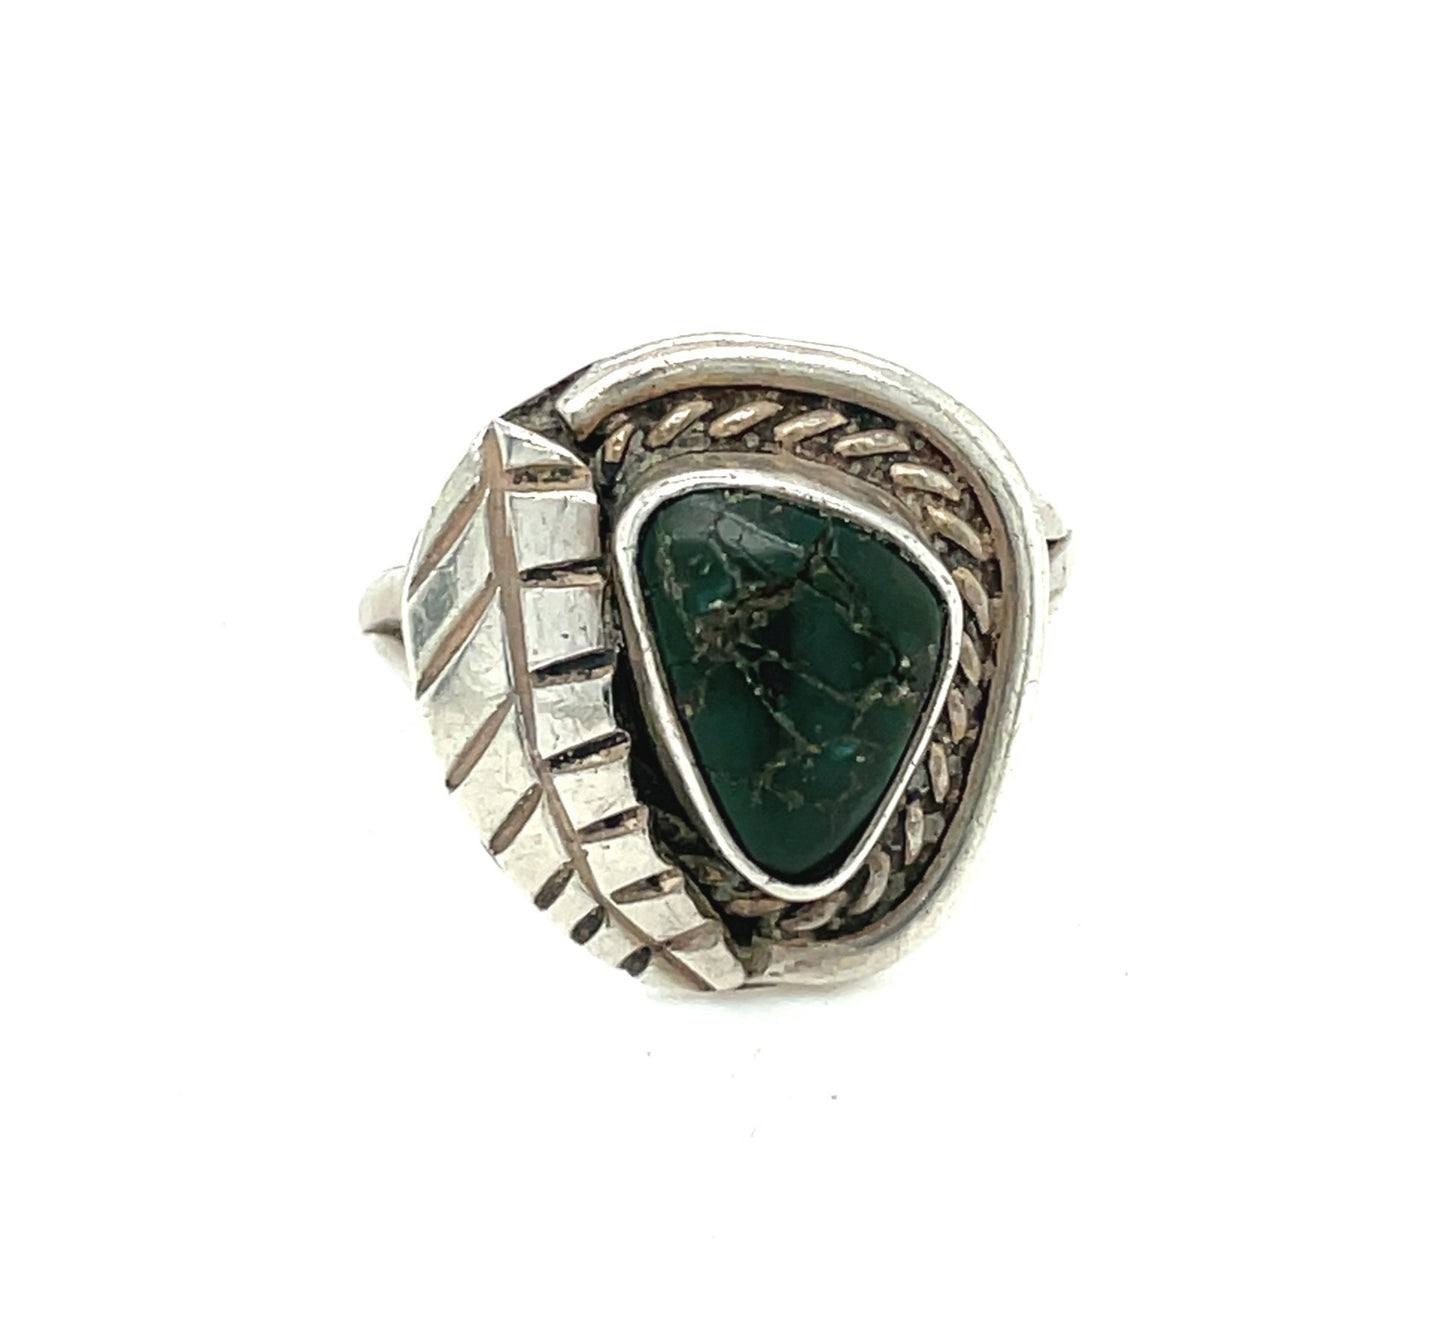 Vintage Southwestern Sterling Silver and Turquoise Ring 3.8 Grams Size 6